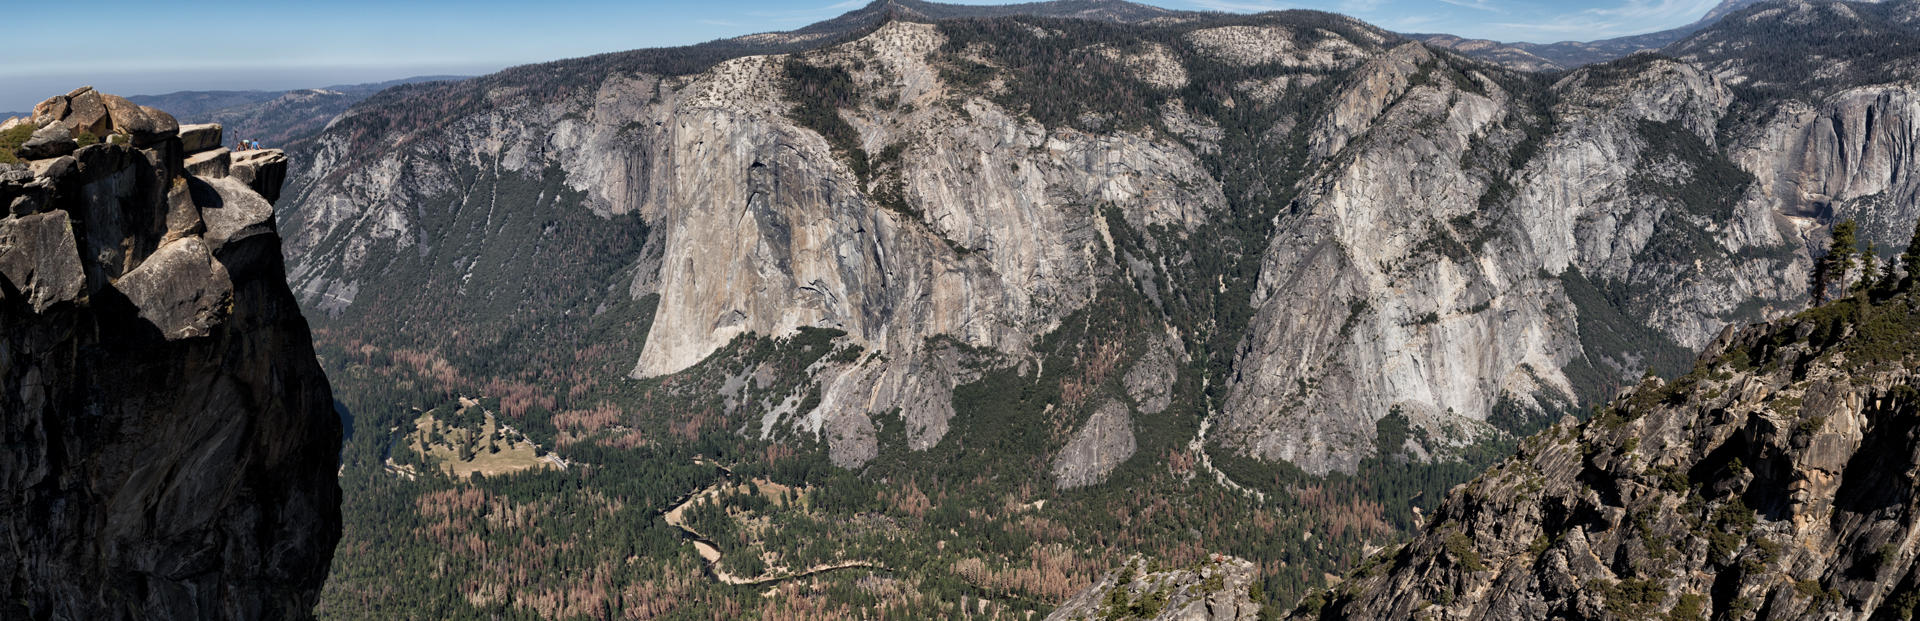 Yosemite Valley viewed from Taft Point 1840-43